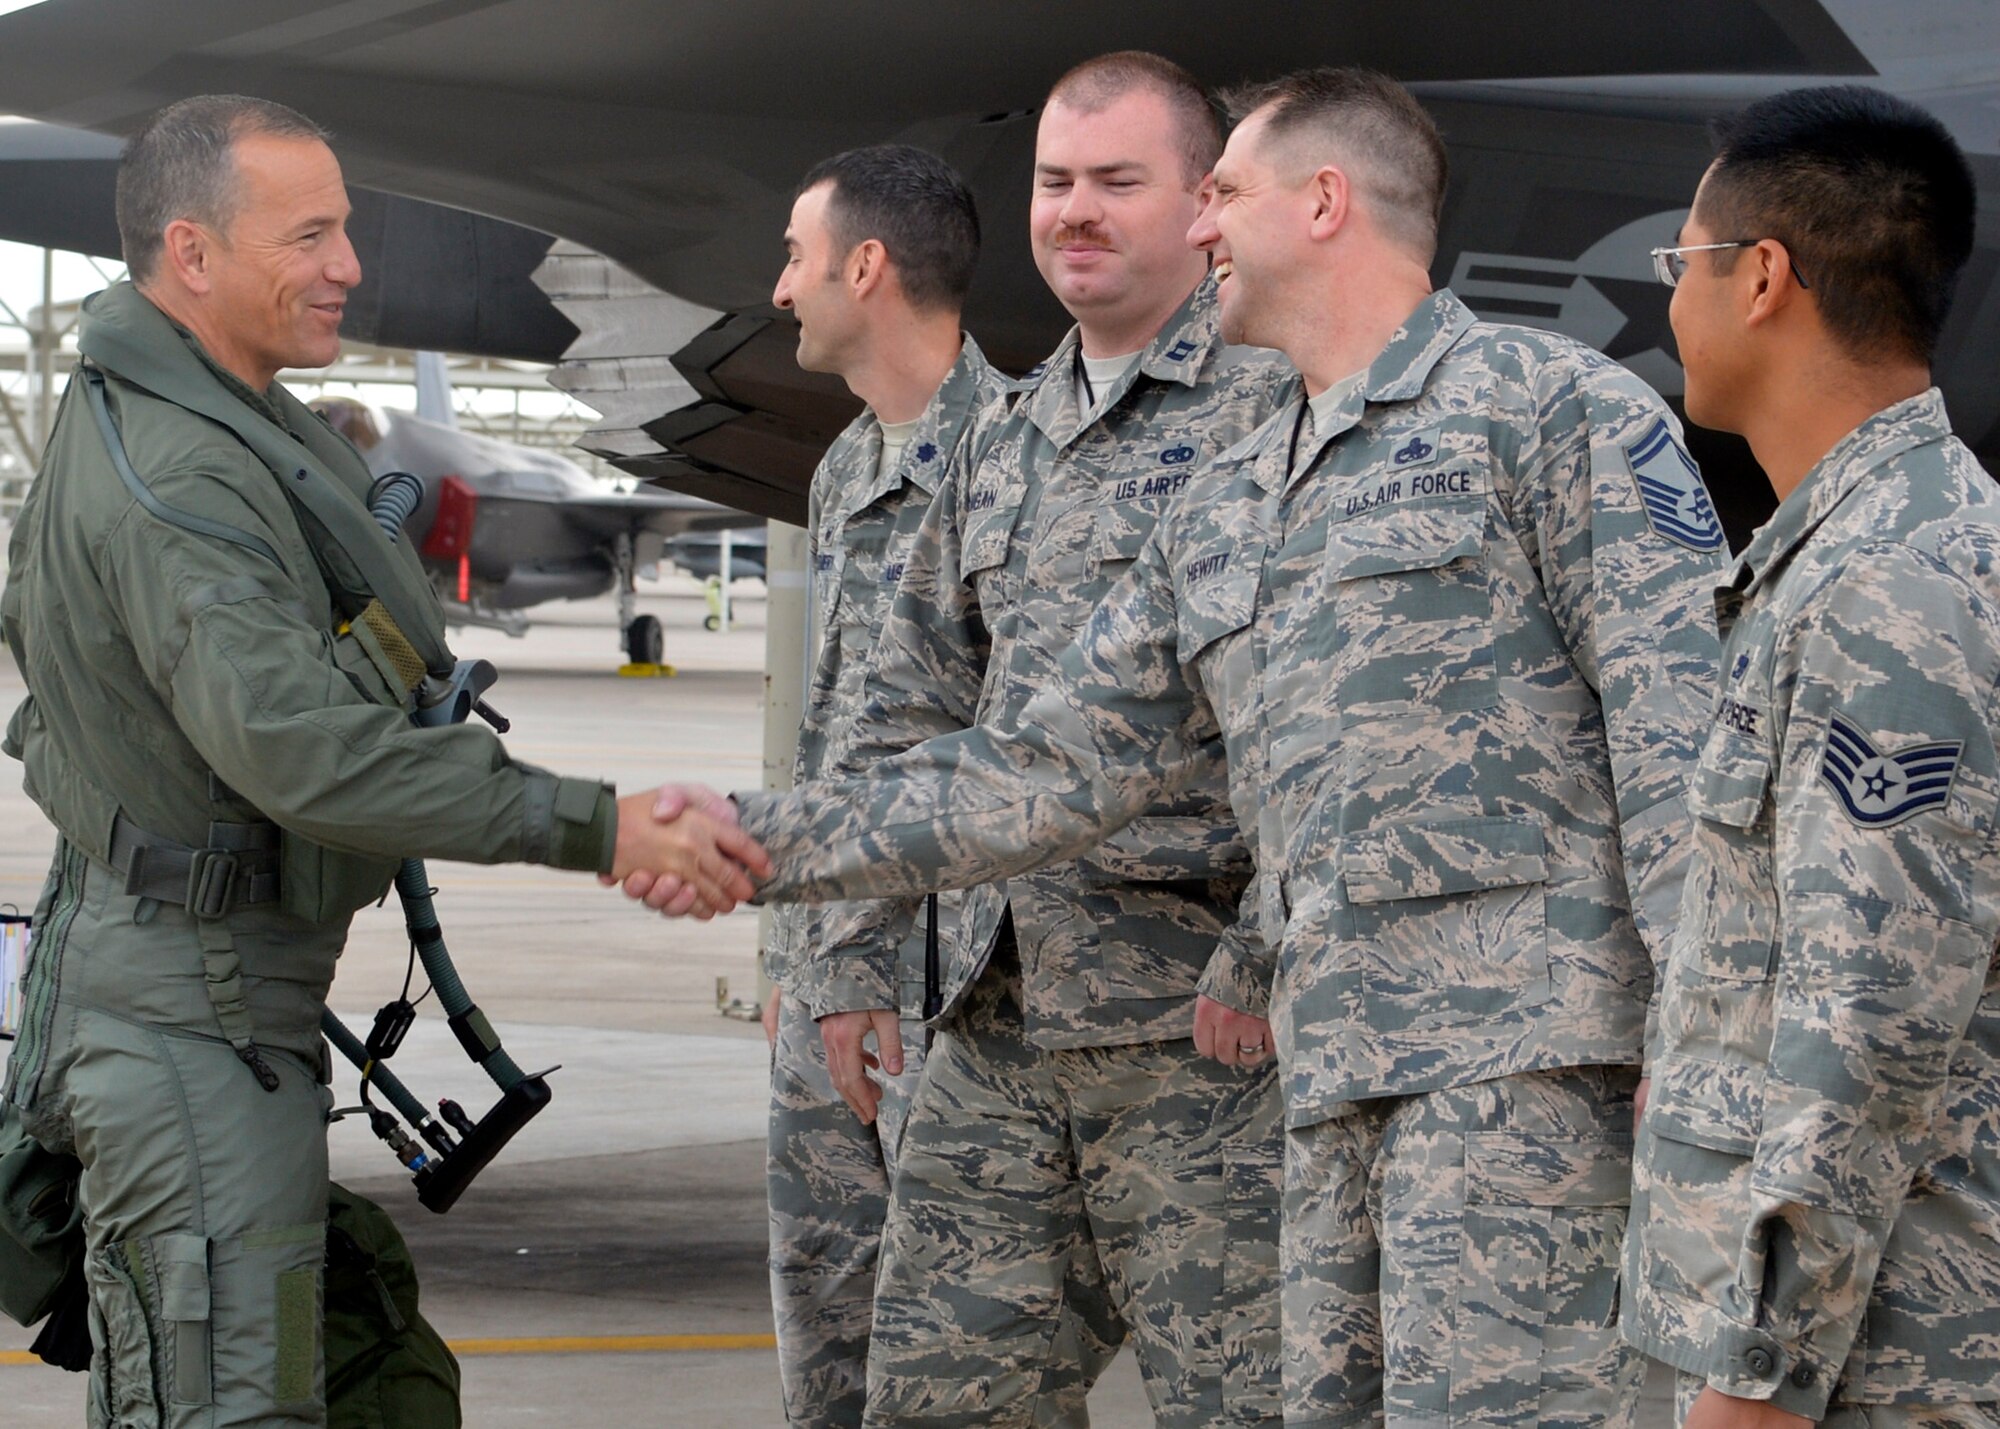 Brig. Gen. Scott Pleus, 56th Fighter Wing commander, greets the ground crew that will launch him during his first F-35 sortie flight at Luke Air Force Base, Arizona, March 18, 2015. (U.S. Air Force photo/Senior Airman Devante Williams)